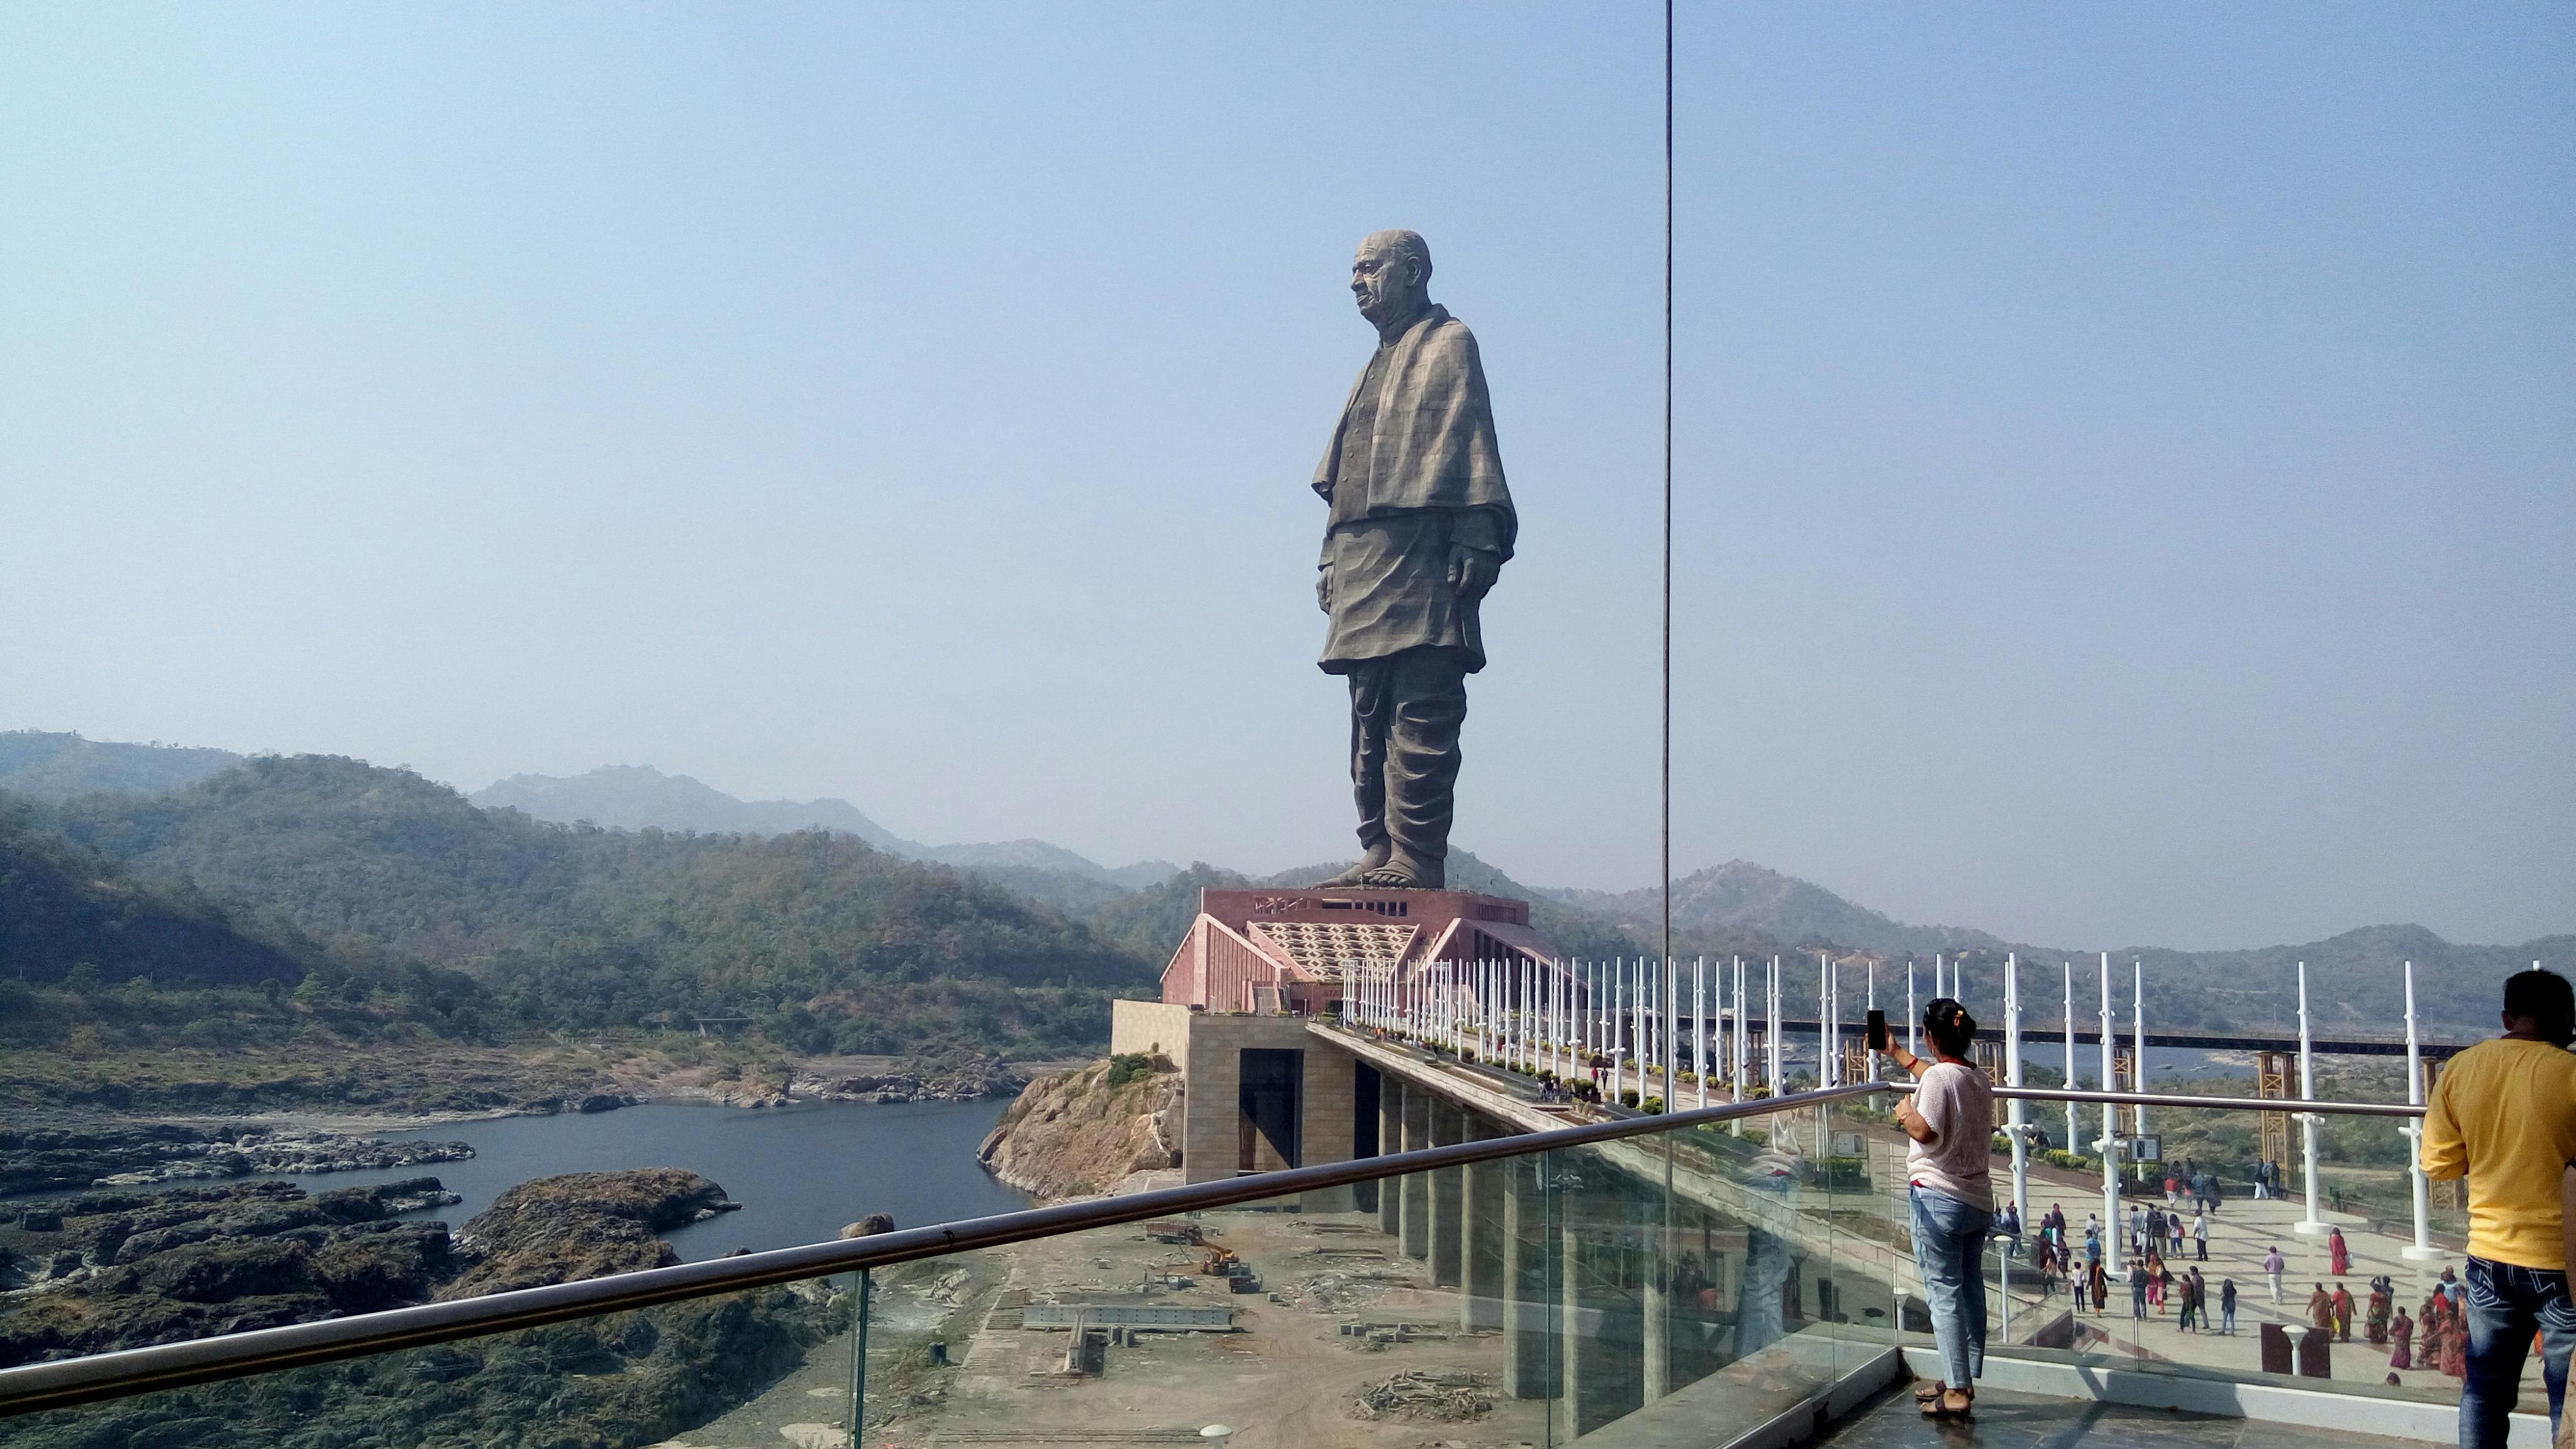 Free stock photo of Statue of Unity, worlds biggest statue